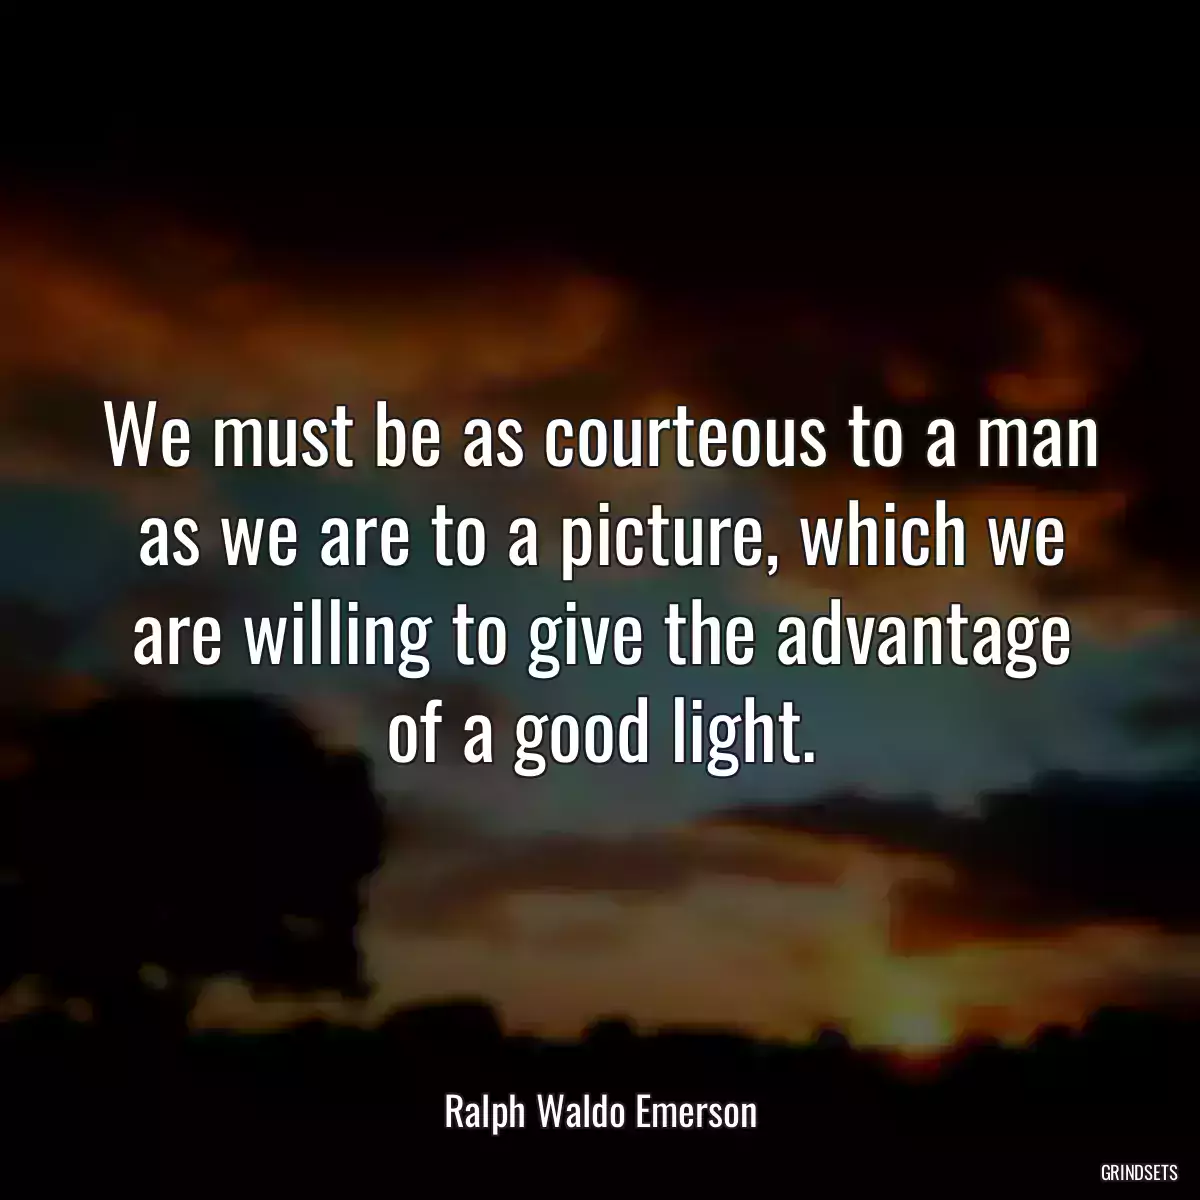 We must be as courteous to a man as we are to a picture, which we are willing to give the advantage of a good light.